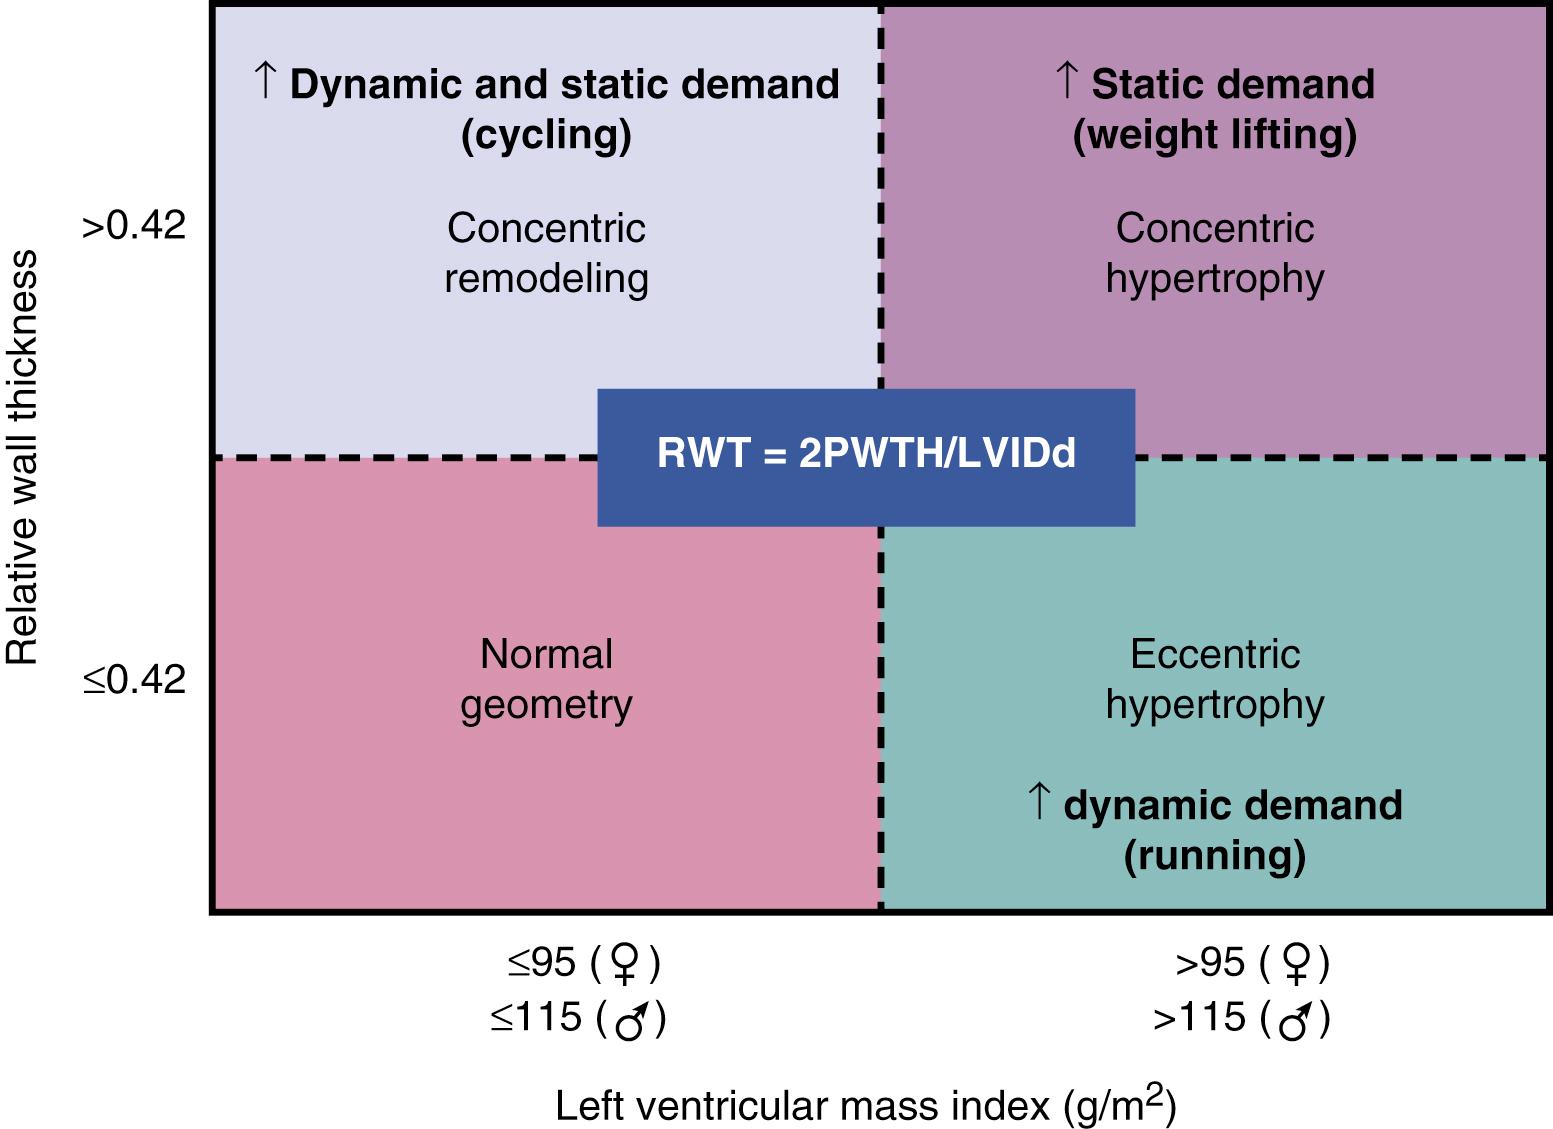 Figure 64.1, Patterns of left ventricular remodeling and wall thickness in association with exercise profile. In the equation: RWT, relative wall thickness; PWTH, posterior wall thickness; LVIDd, LV internal dimensions at end-diastole.